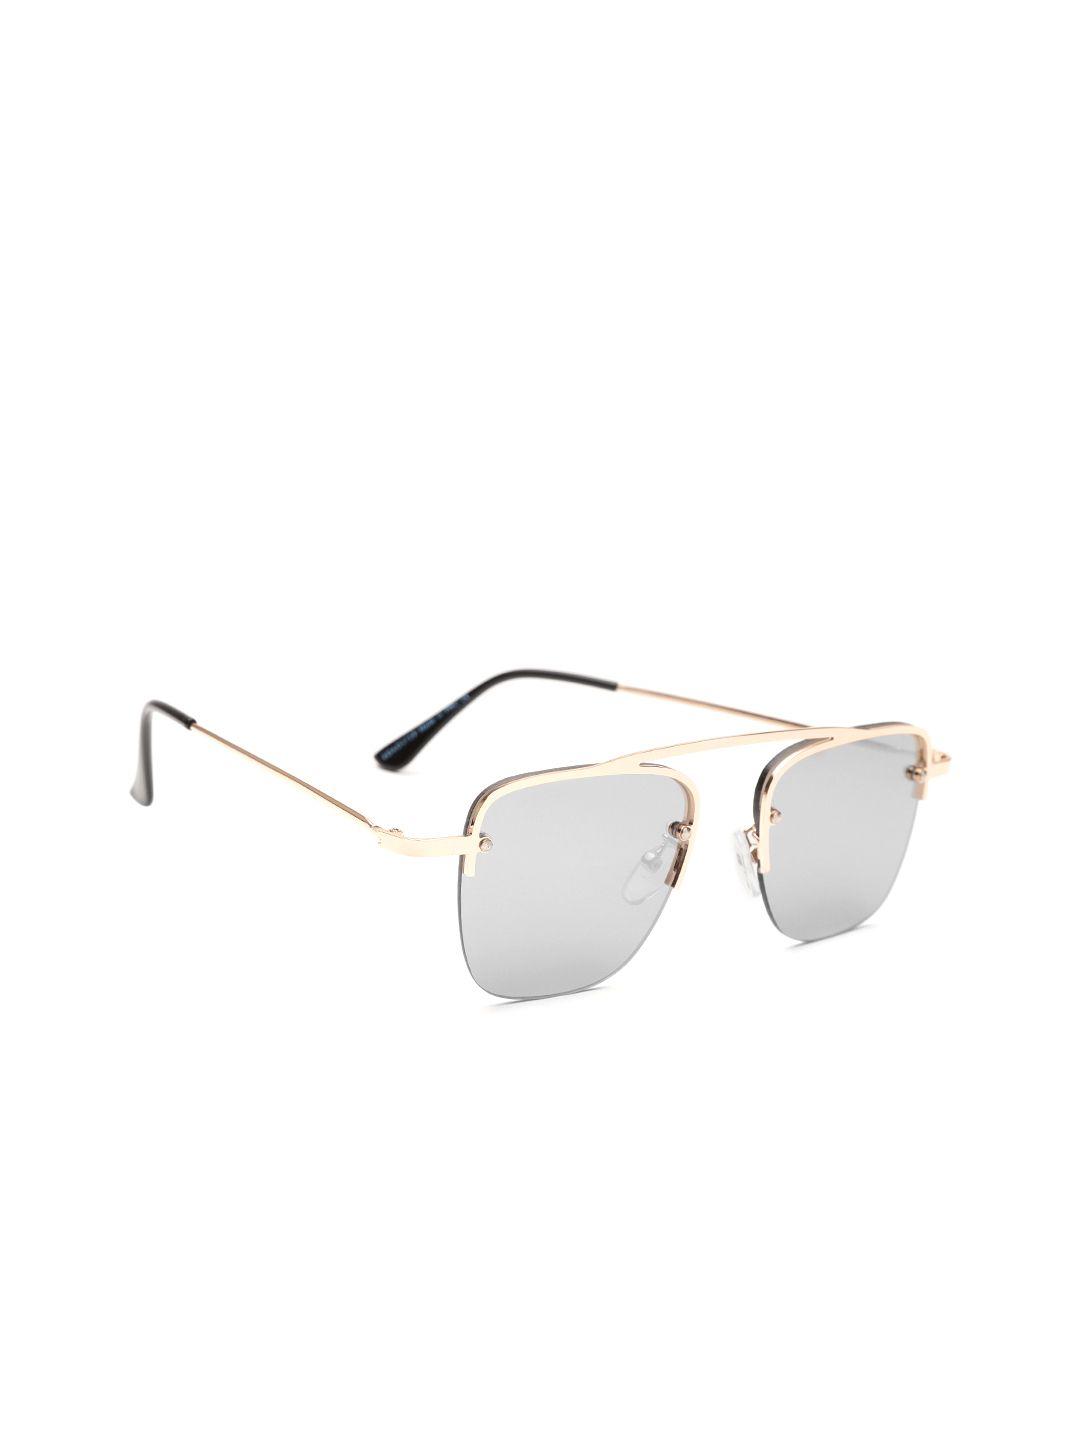 the roadster lifestyle co unisex mirrored square sunglasses mfb-pn-ps-t9487